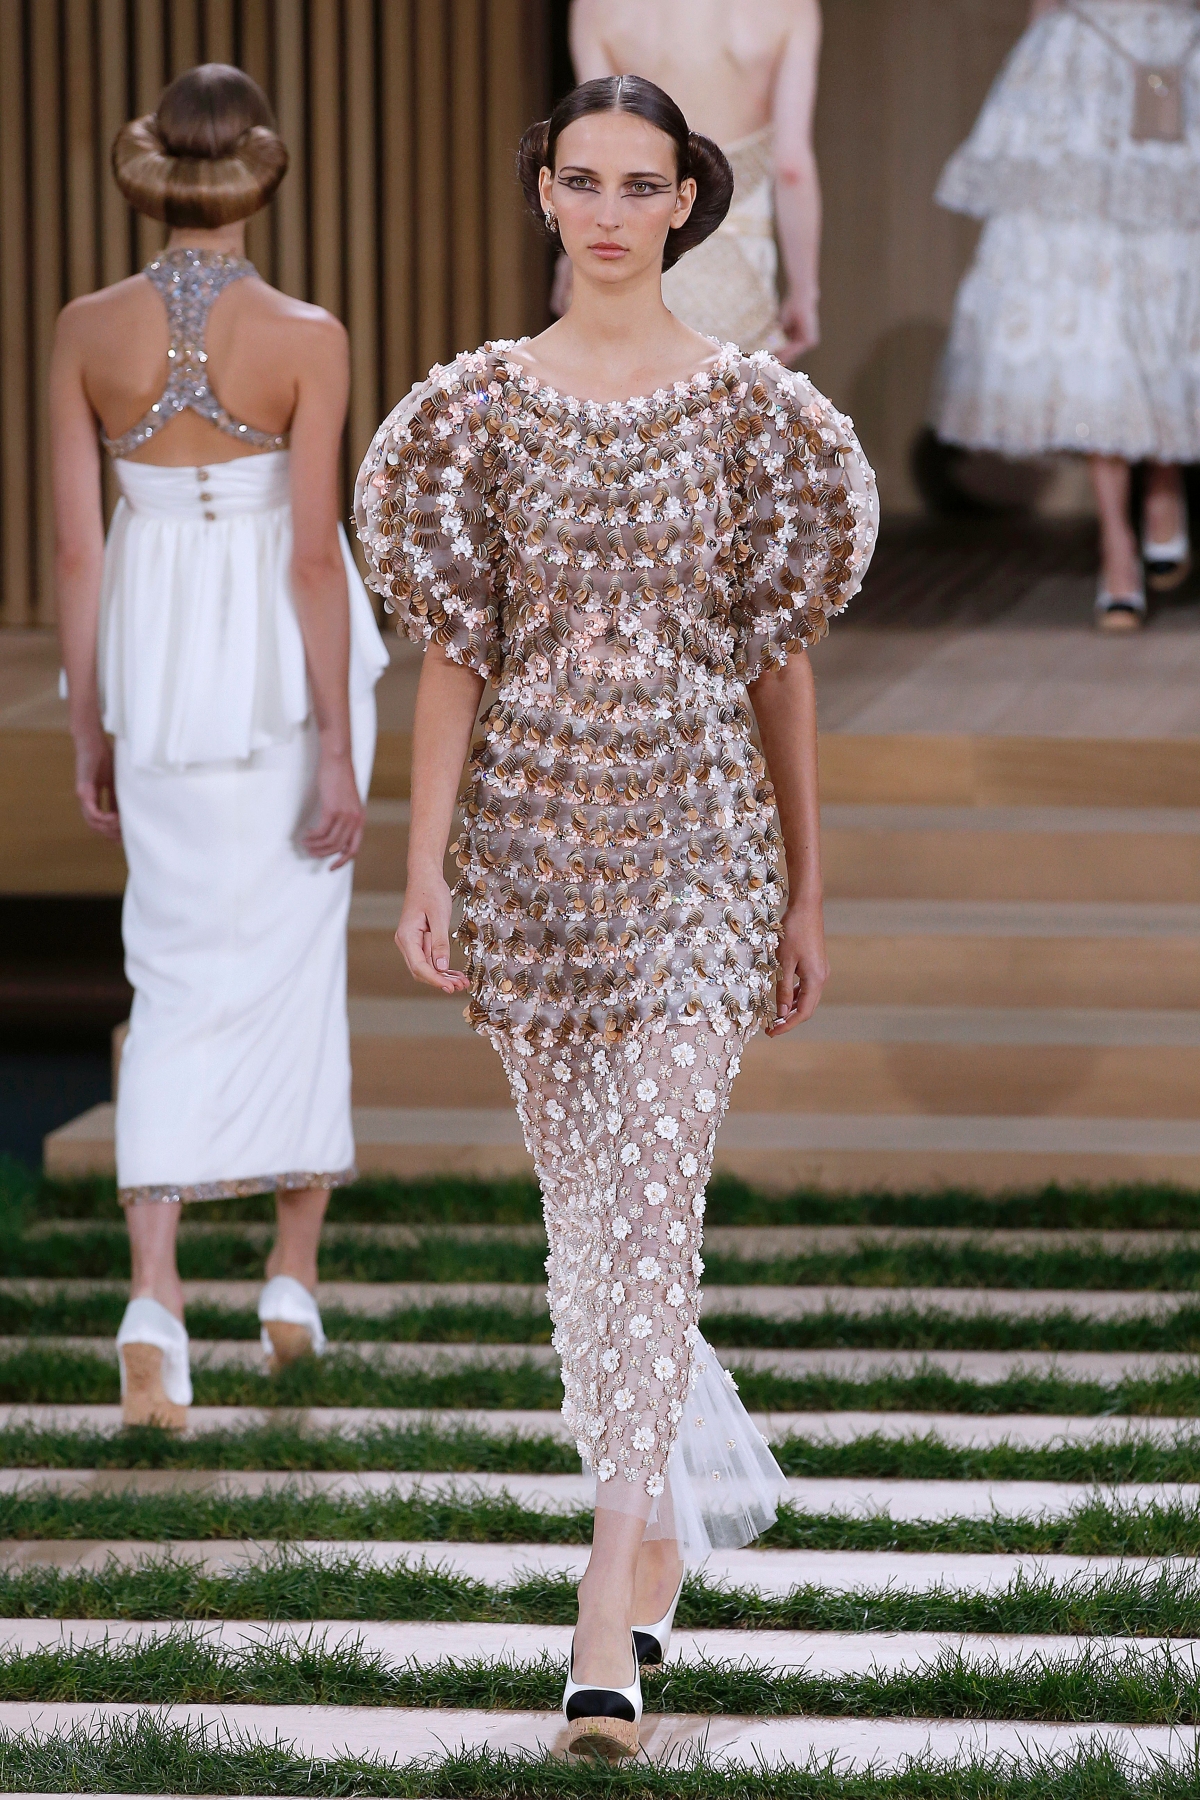 Chanel Haute Couture SS16 show